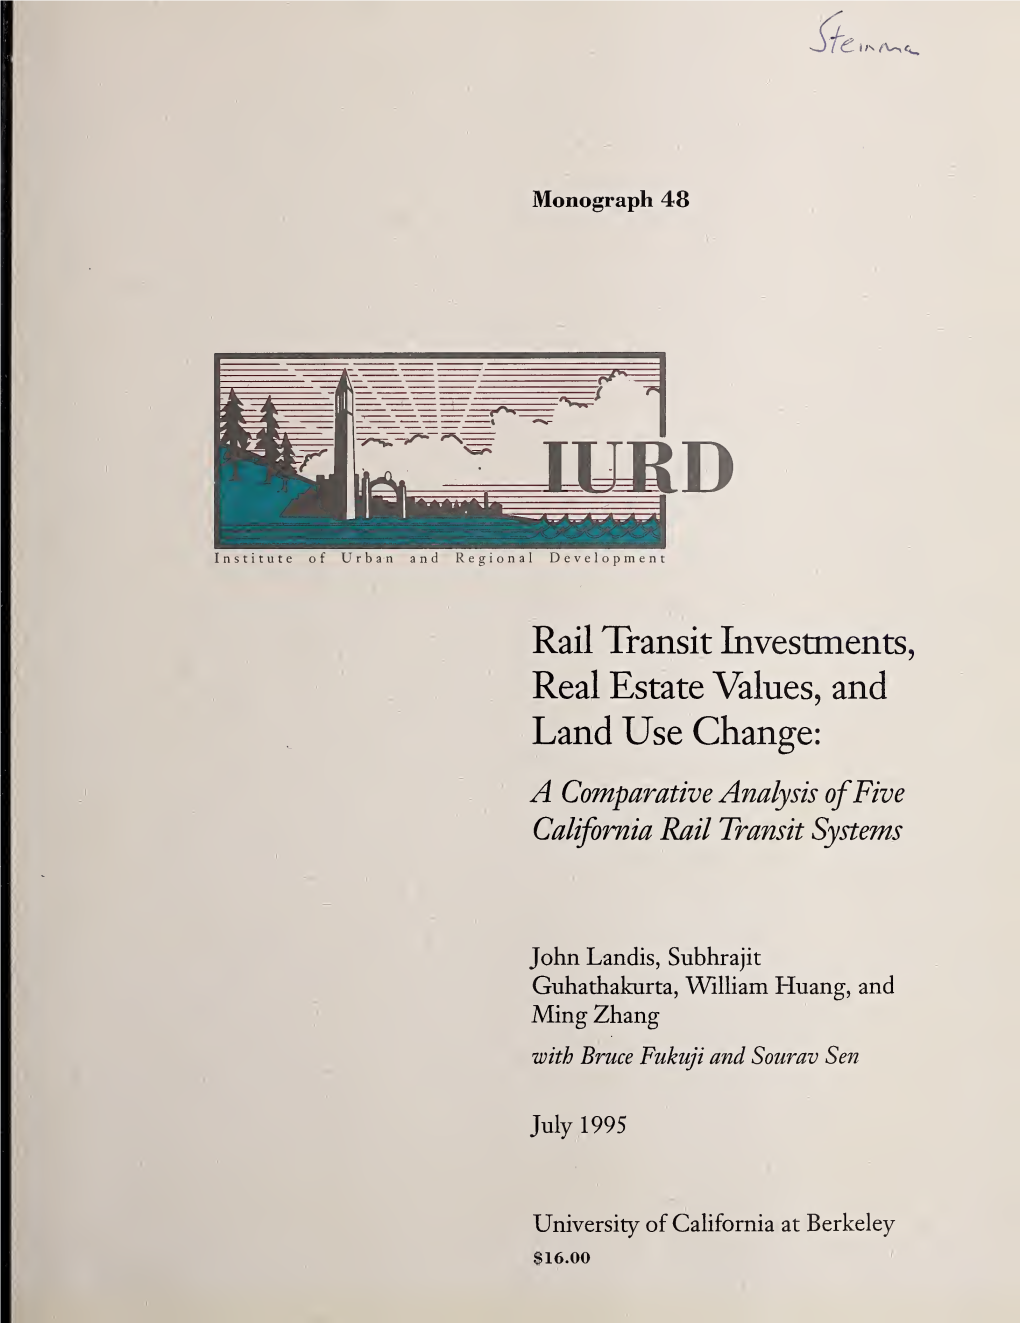 Rail Transit Investments, Real Estate Values, and Land Use Change: a Comparative Analysis of Five California Rail Transit System